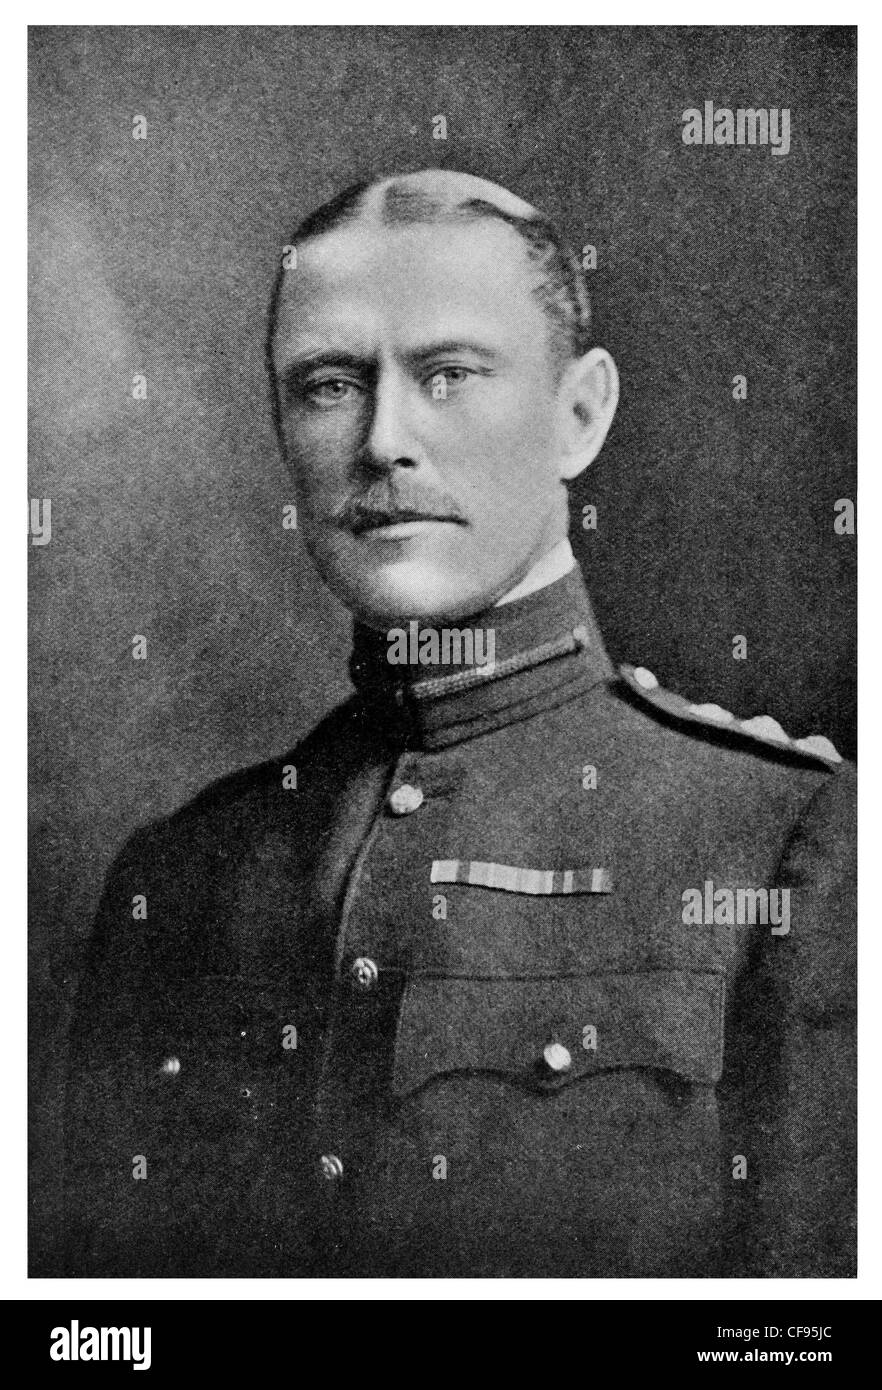 Major General Sir Alexander John Godley GCB, KCMG New Zealand Expeditionary Force and II Anzac Corps during the First World War. Stock Photo